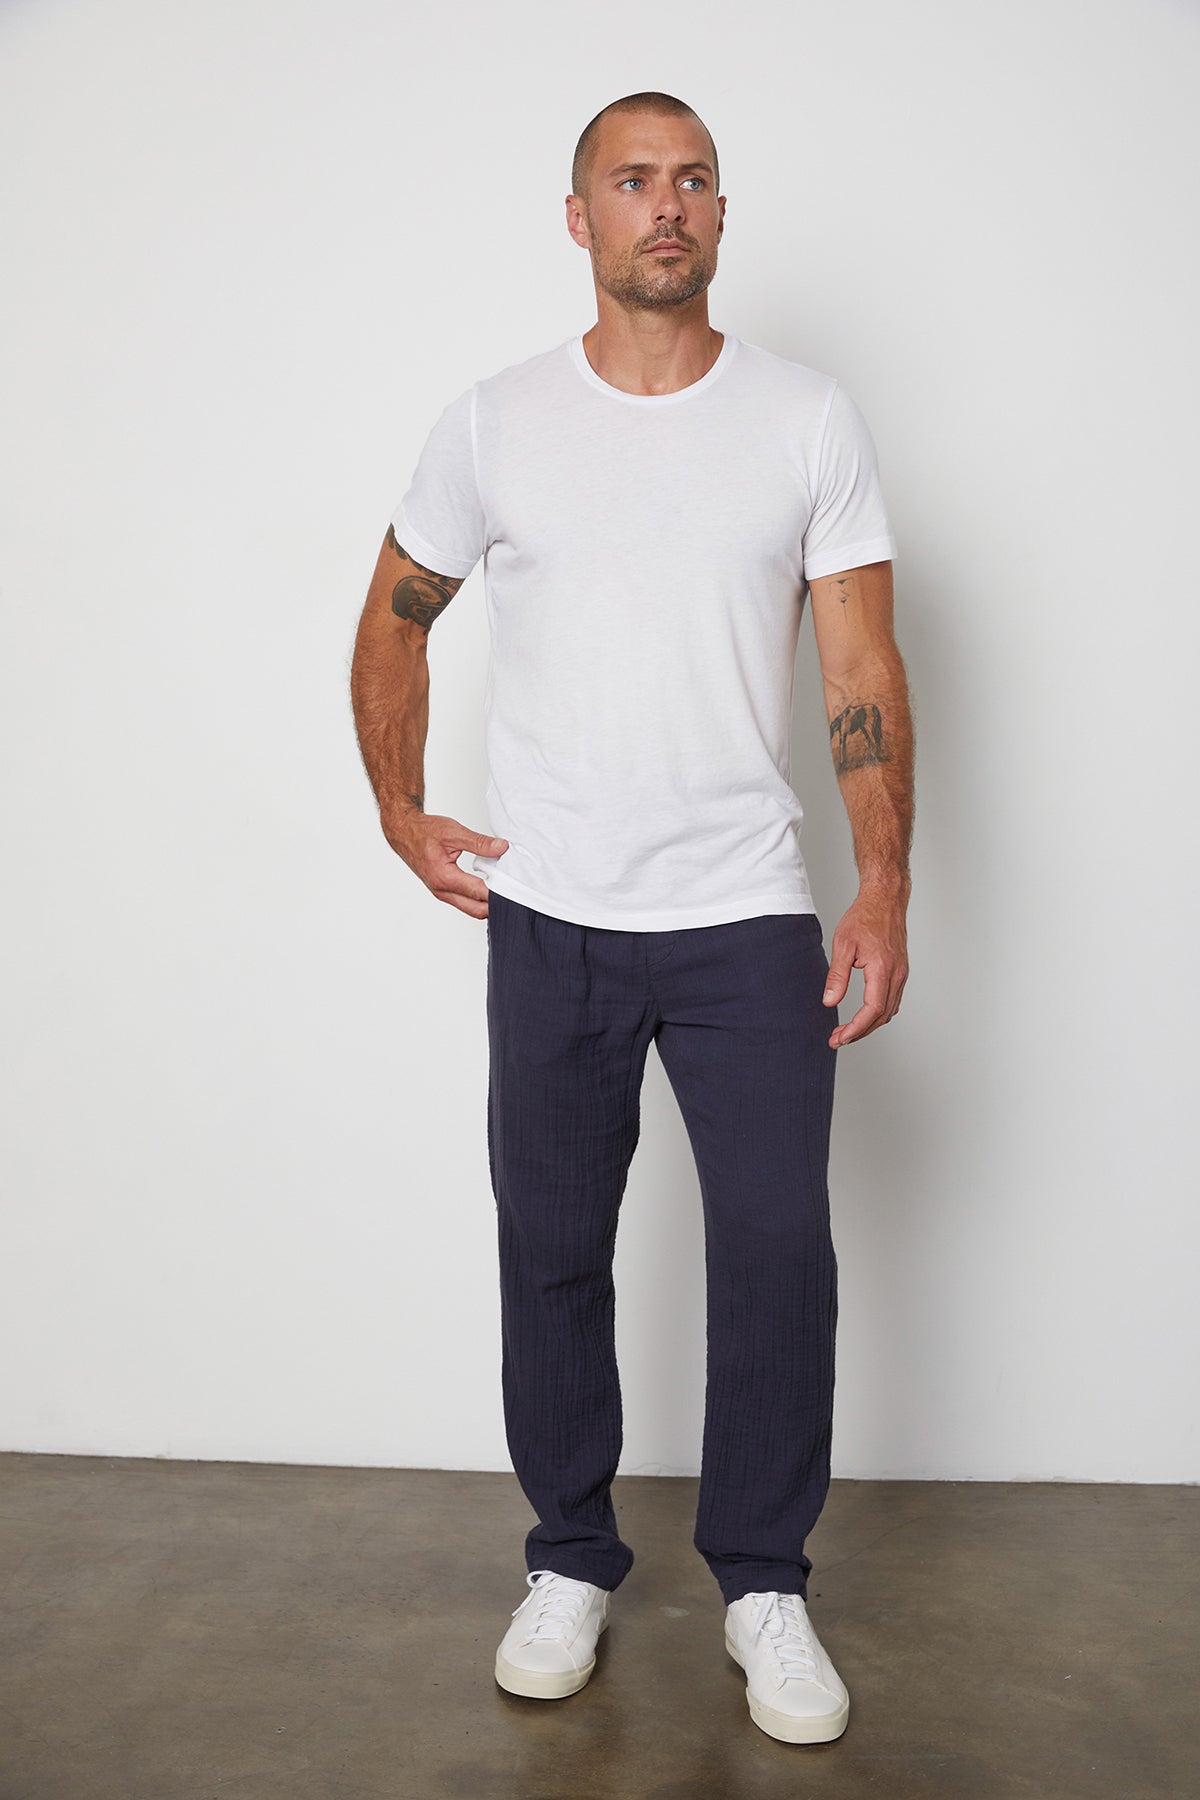 Ryan Drawstring Pant in Ink with Angelo Tee in White-24605769990337